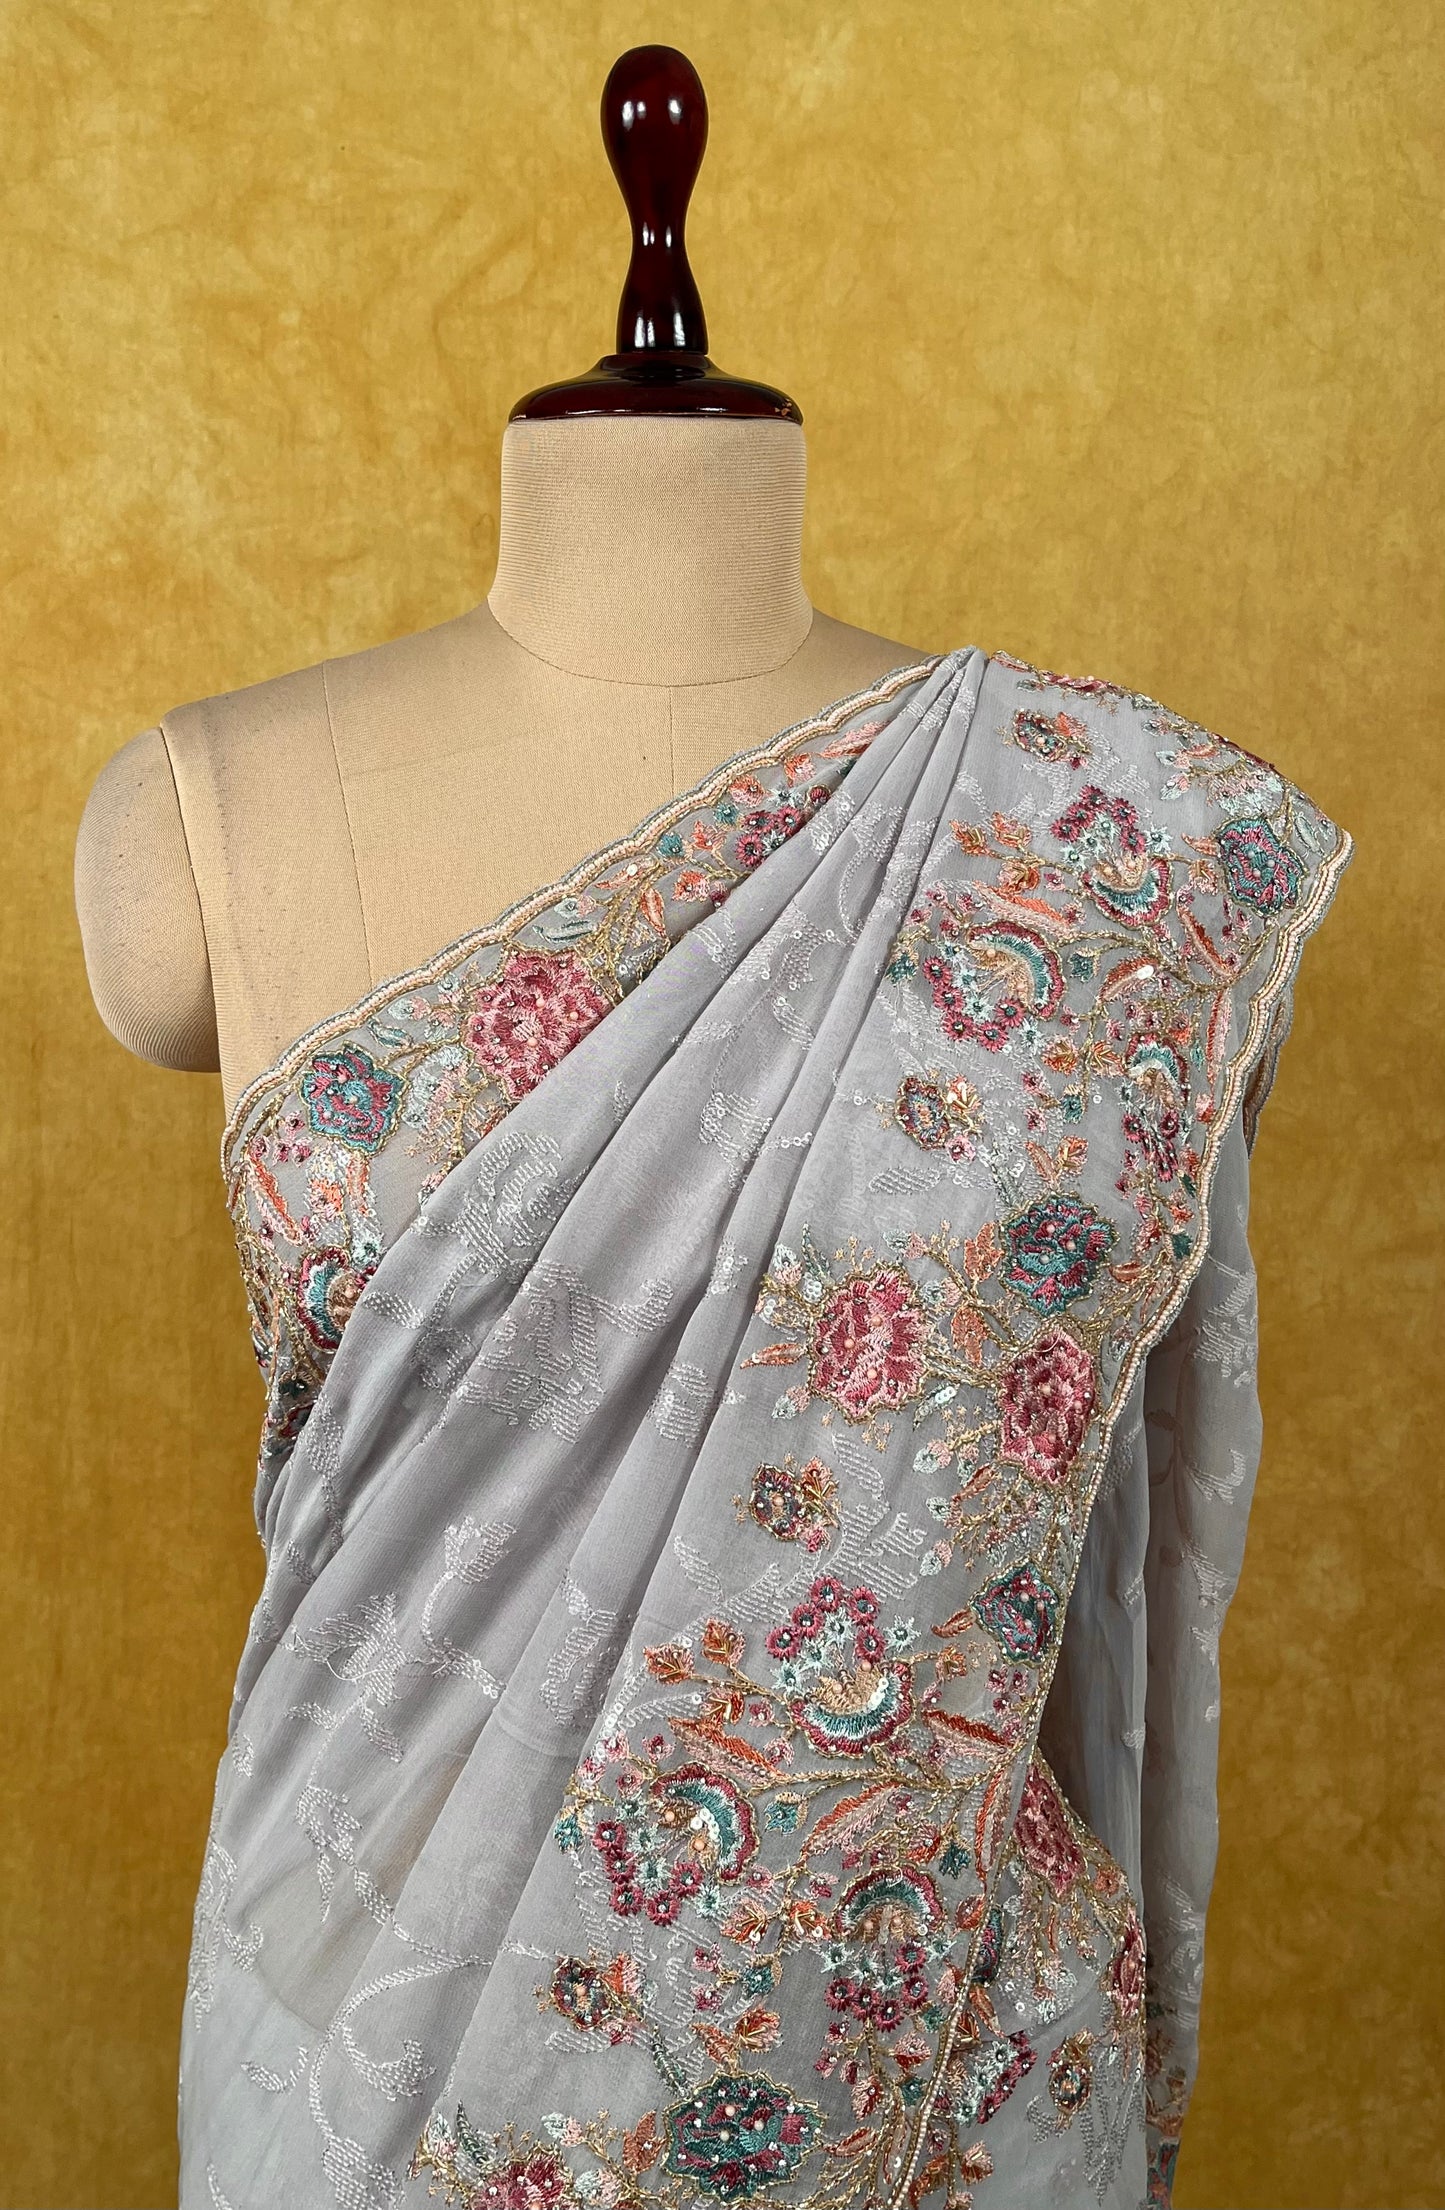 GREY COLOUR GEORGETTE EMBROIDERED SAREE EMBELLISHED WITH SEQUINS, BEADS & RESHAM WORK